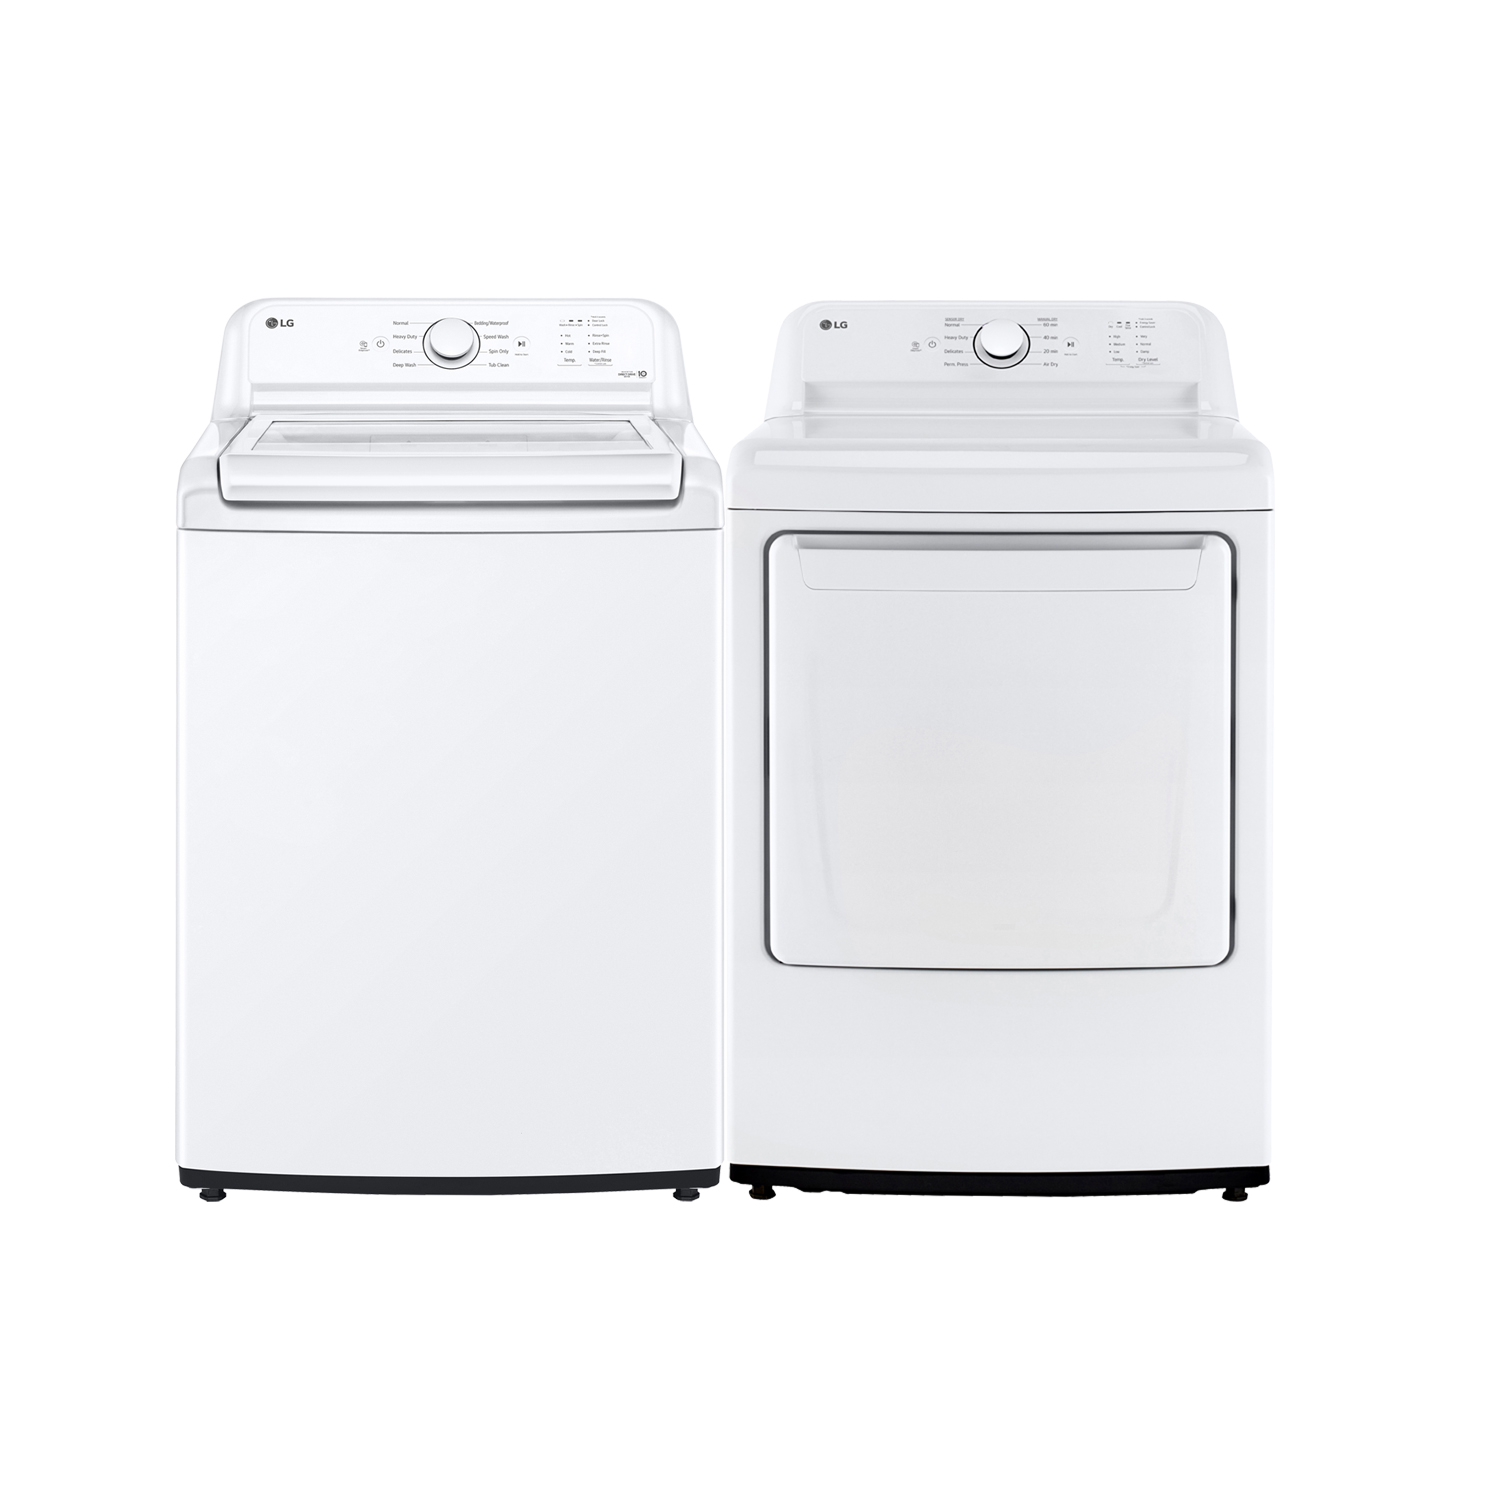 LG 4.8 Cu. Ft. High Efficiency Top Load Washer & Dryer - White